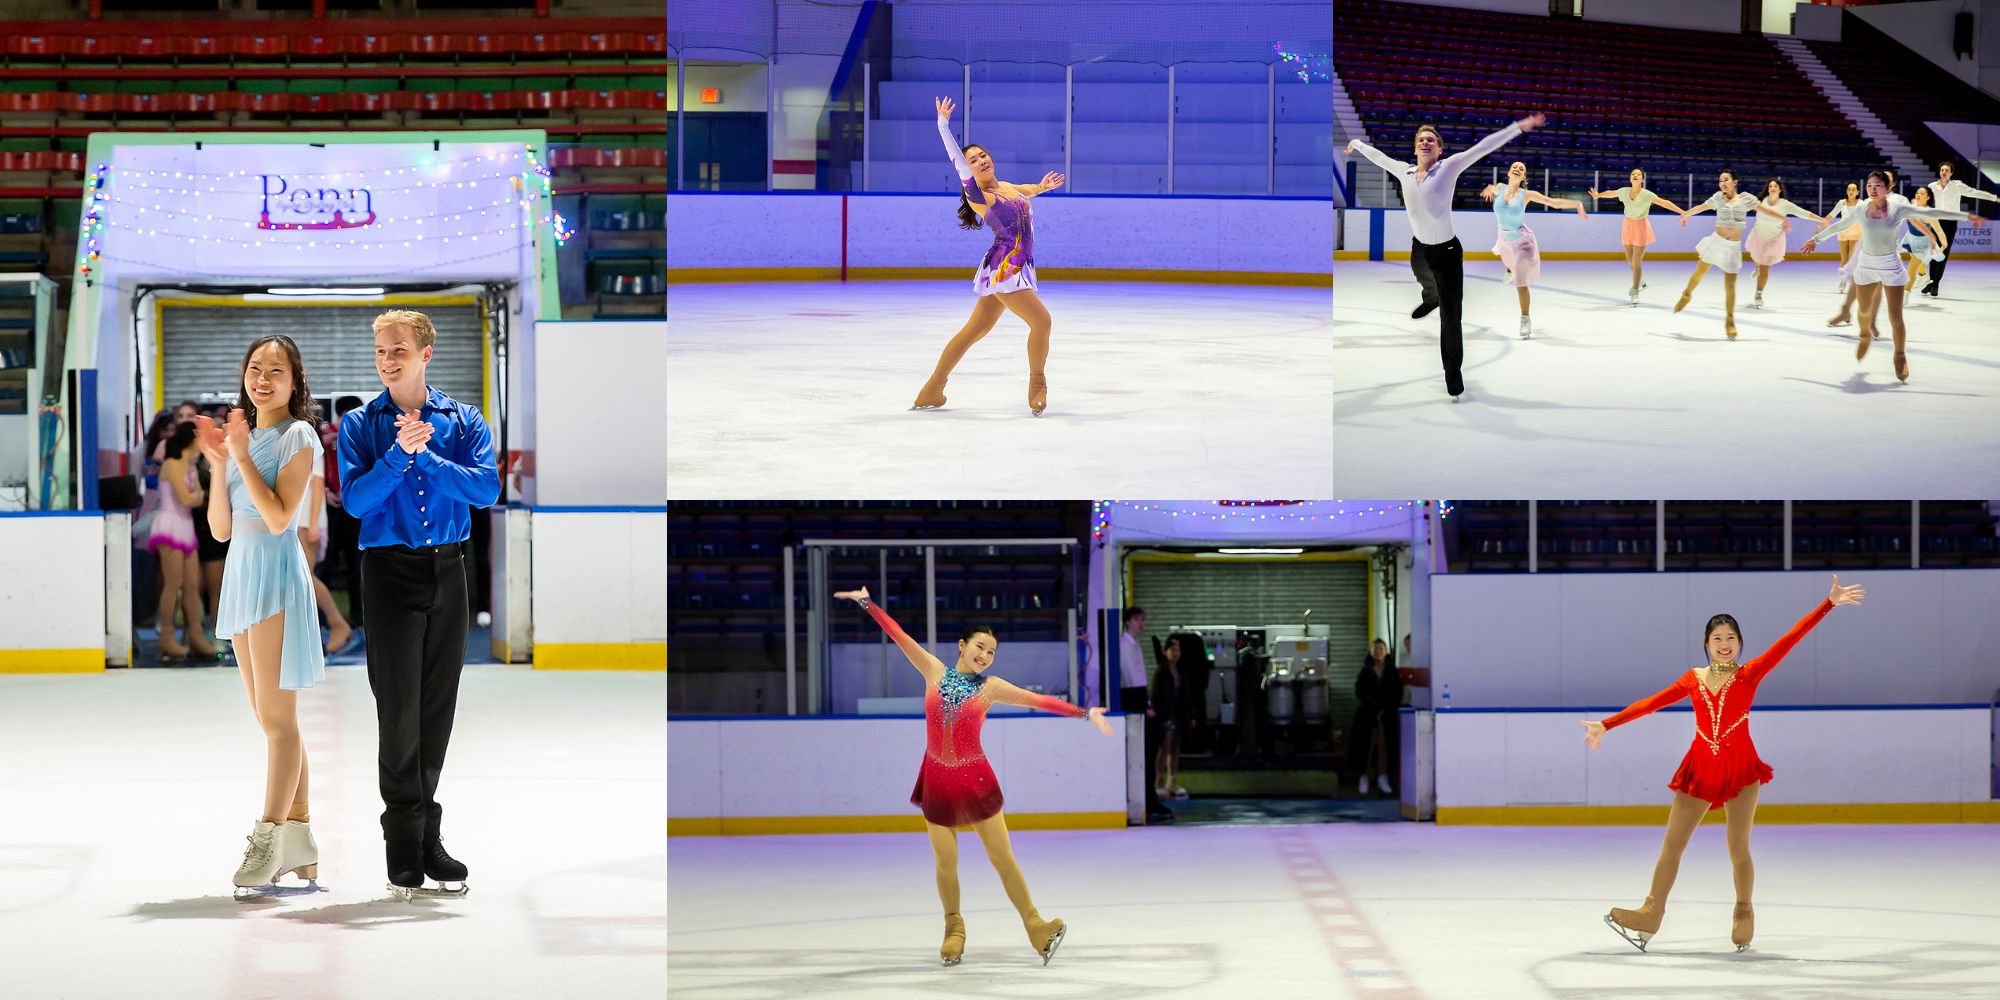 Four different shots of ice skaters performing various roles of The Nutcracker.